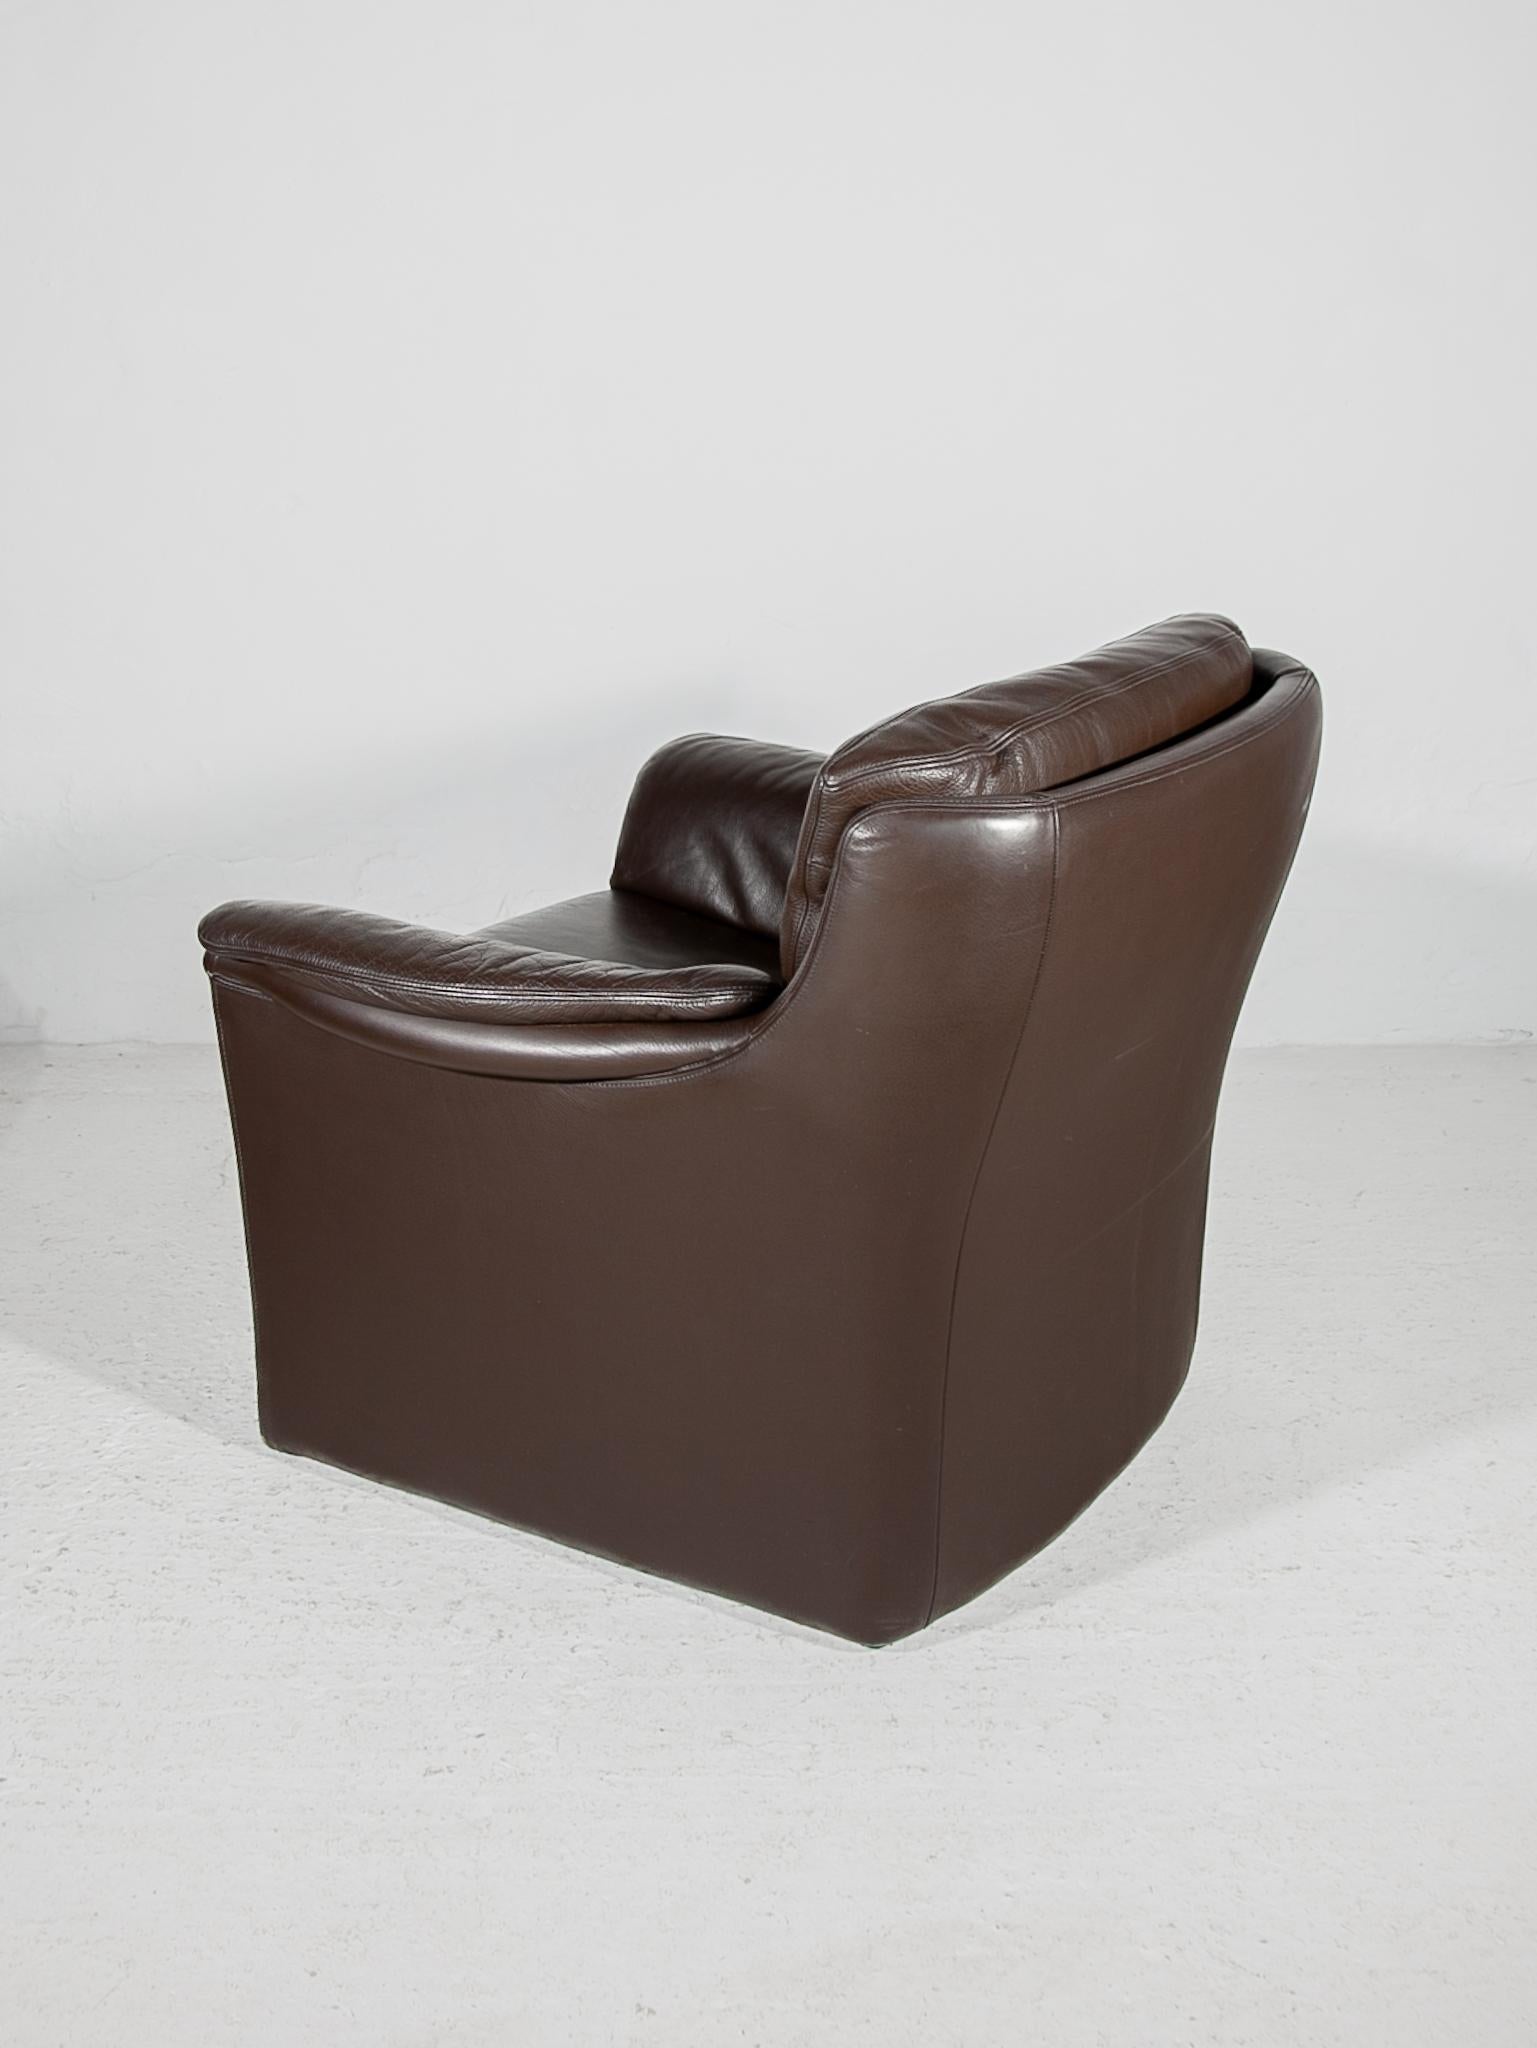  Durlet Lounge Chair, Buffolo Brown Leather, 1970s In Good Condition For Sale In Antwerp, BE